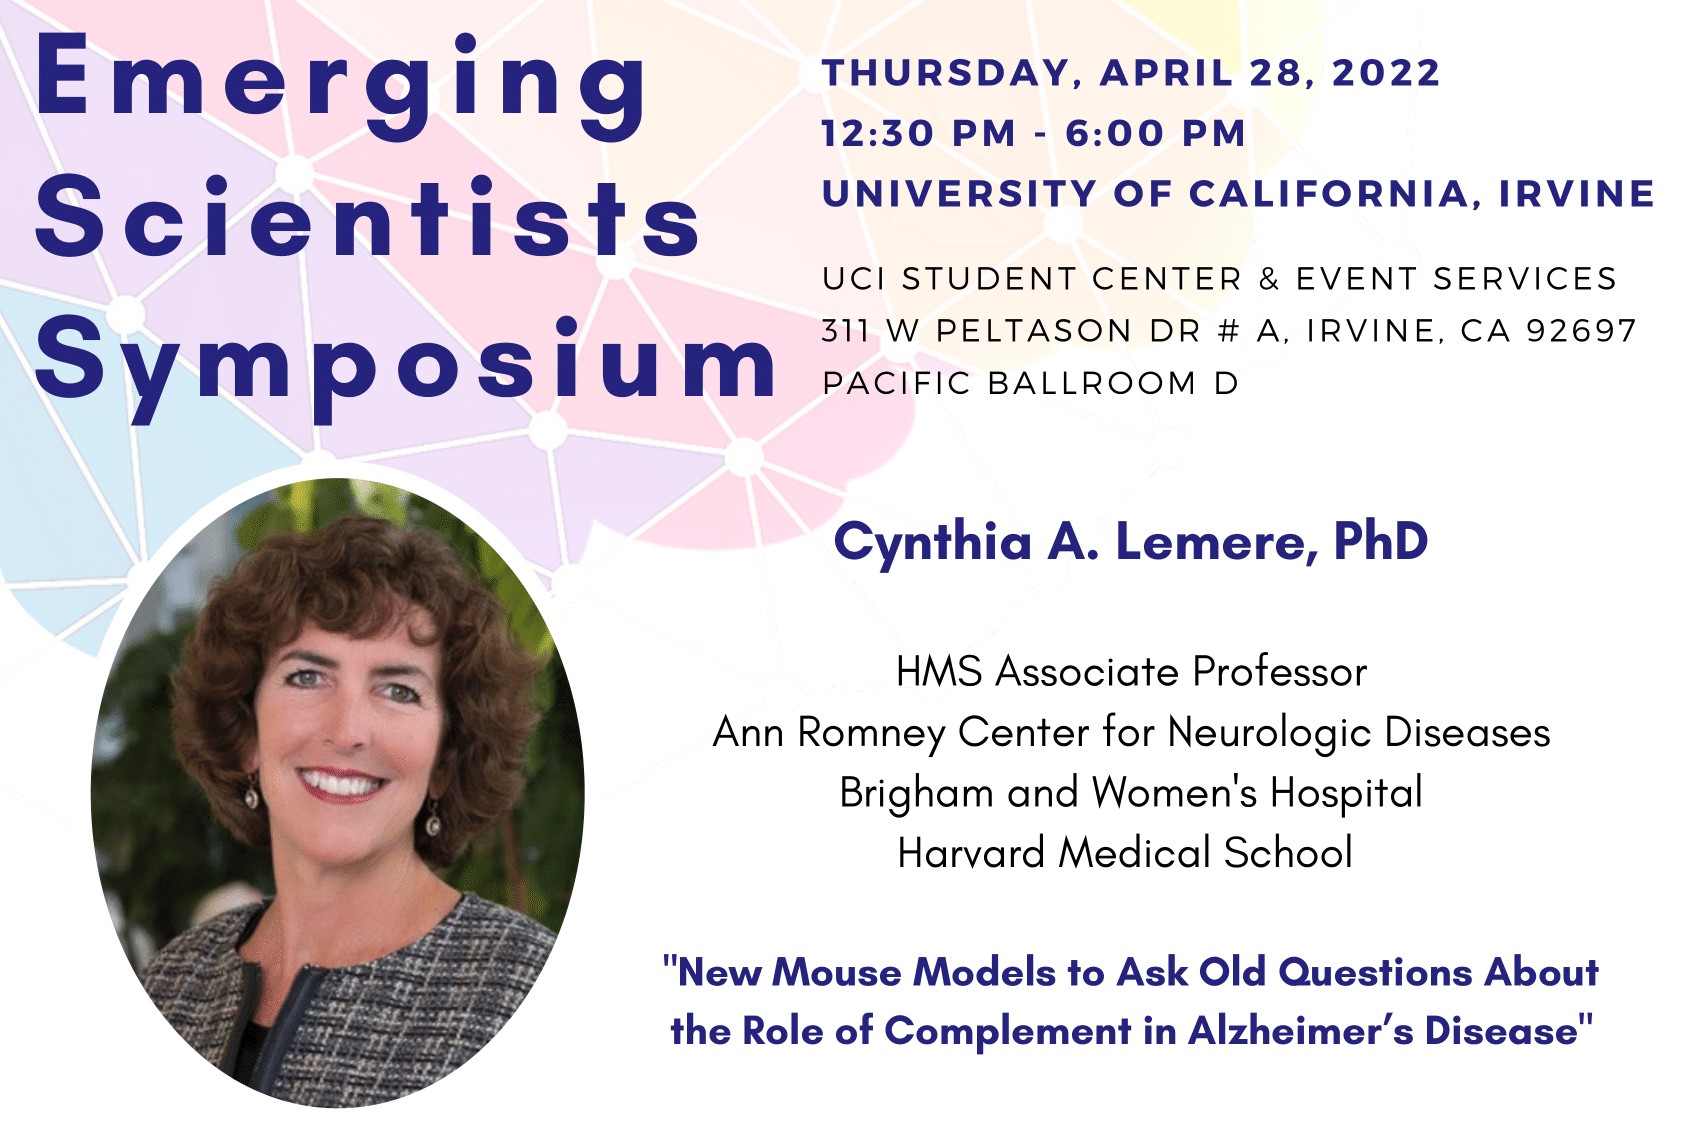 13th Annual Emerging Scientists Symposium. Thursday, April 28, 2022 at Pacific Ballroom D, UCI Student Center & Event Services. Please join REMIND and UCI MIND with keynote speaker, Cynthia Lemere, PhD, HMS Associate Professor at the Ann Rom